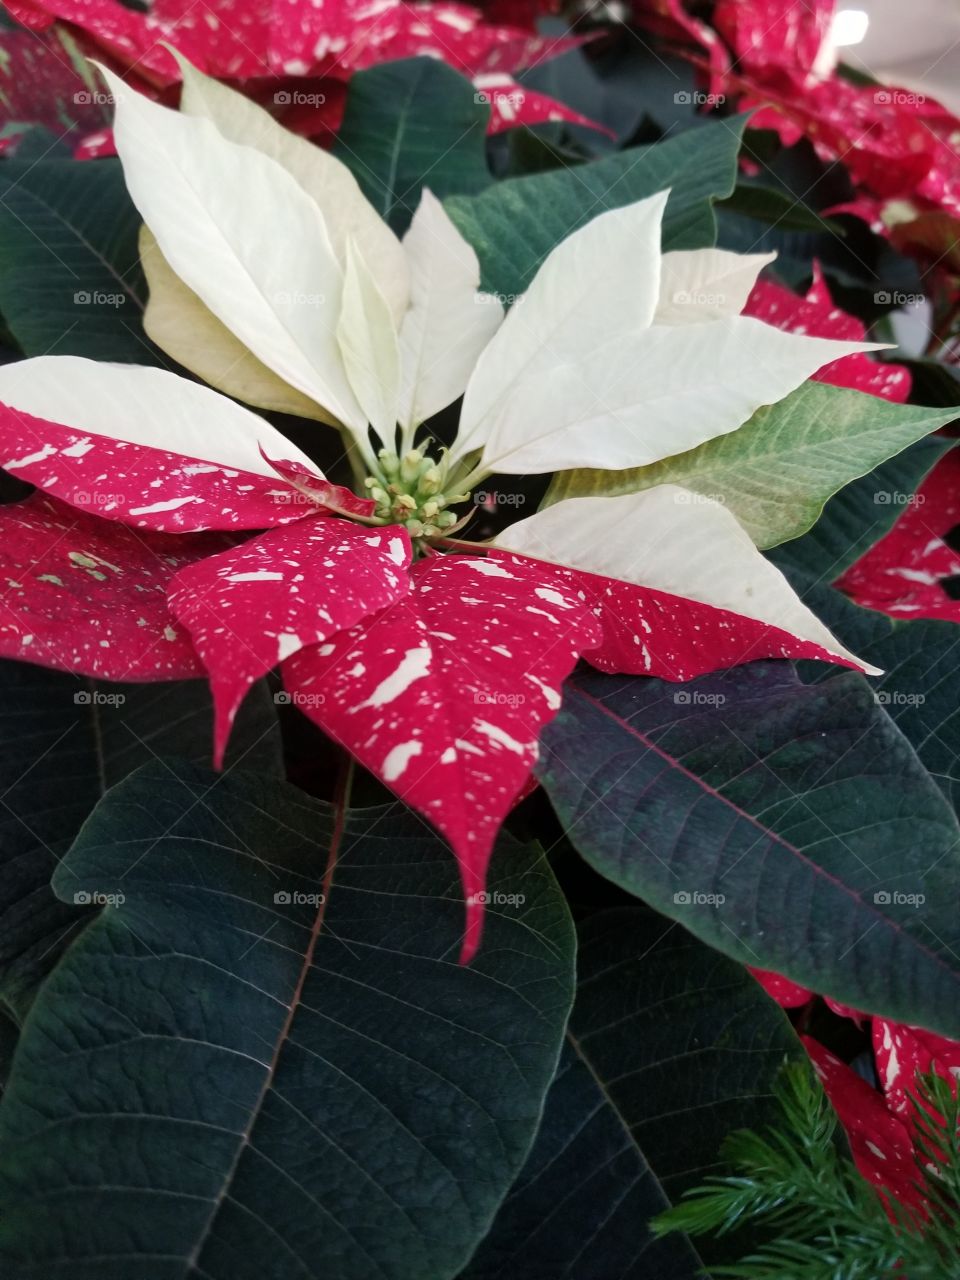 Christmas from both. 
when I look at this I see two different Christmas spirits coming together as one . the one being the pointsetta a Christmas plant everyone loves and two spirits as the two colors on the same plant